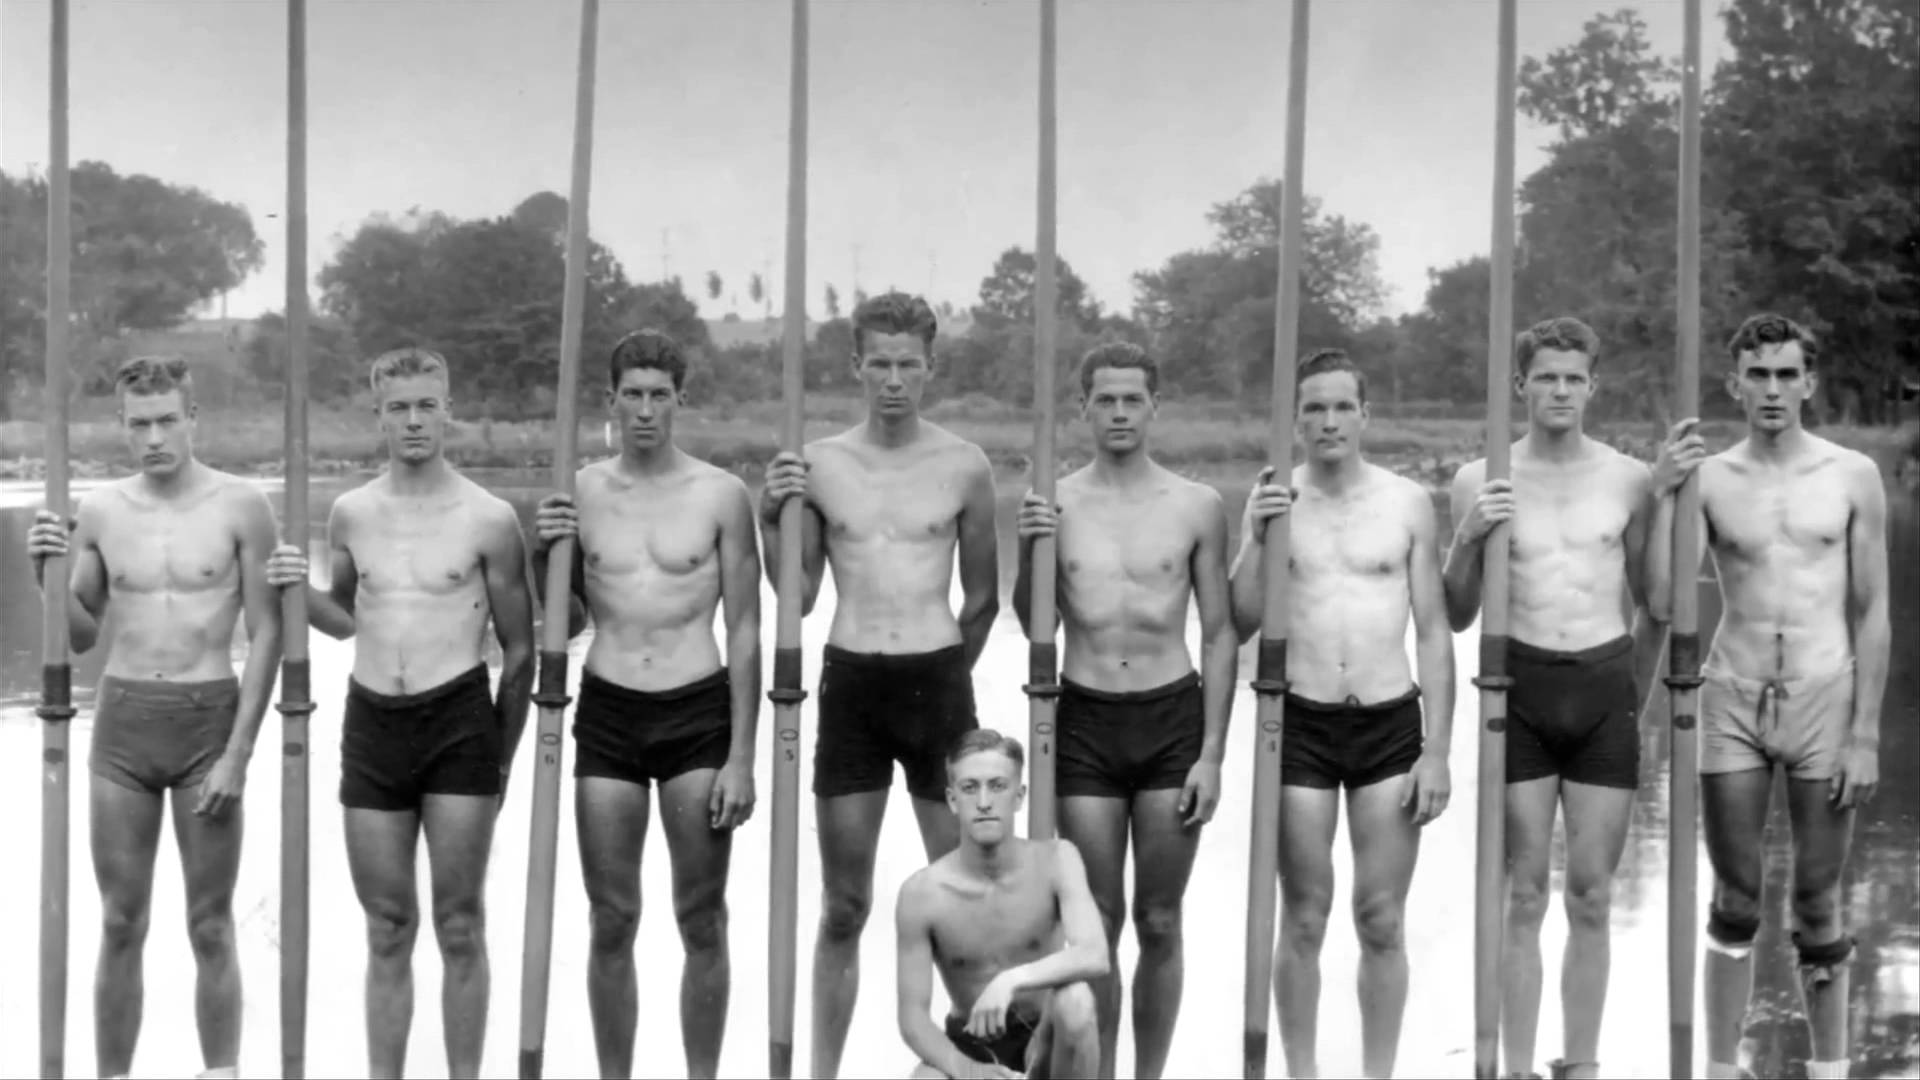 Us Against The World - A Washington Rowing Legacy (Watch the film now)